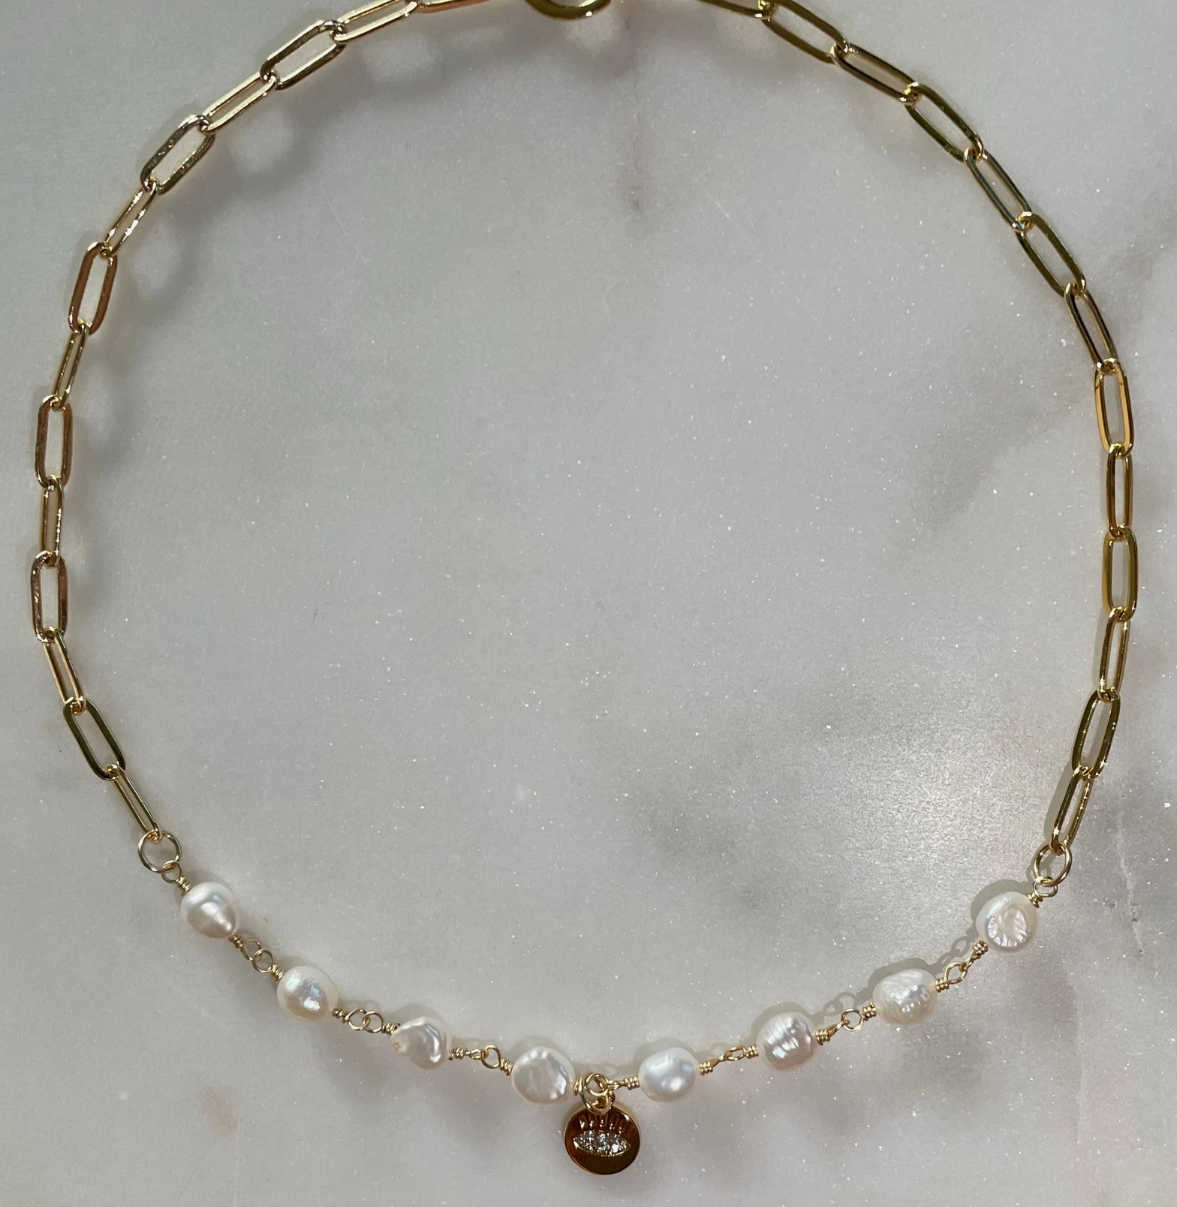 Imagine Freshwater Pearl Necklace